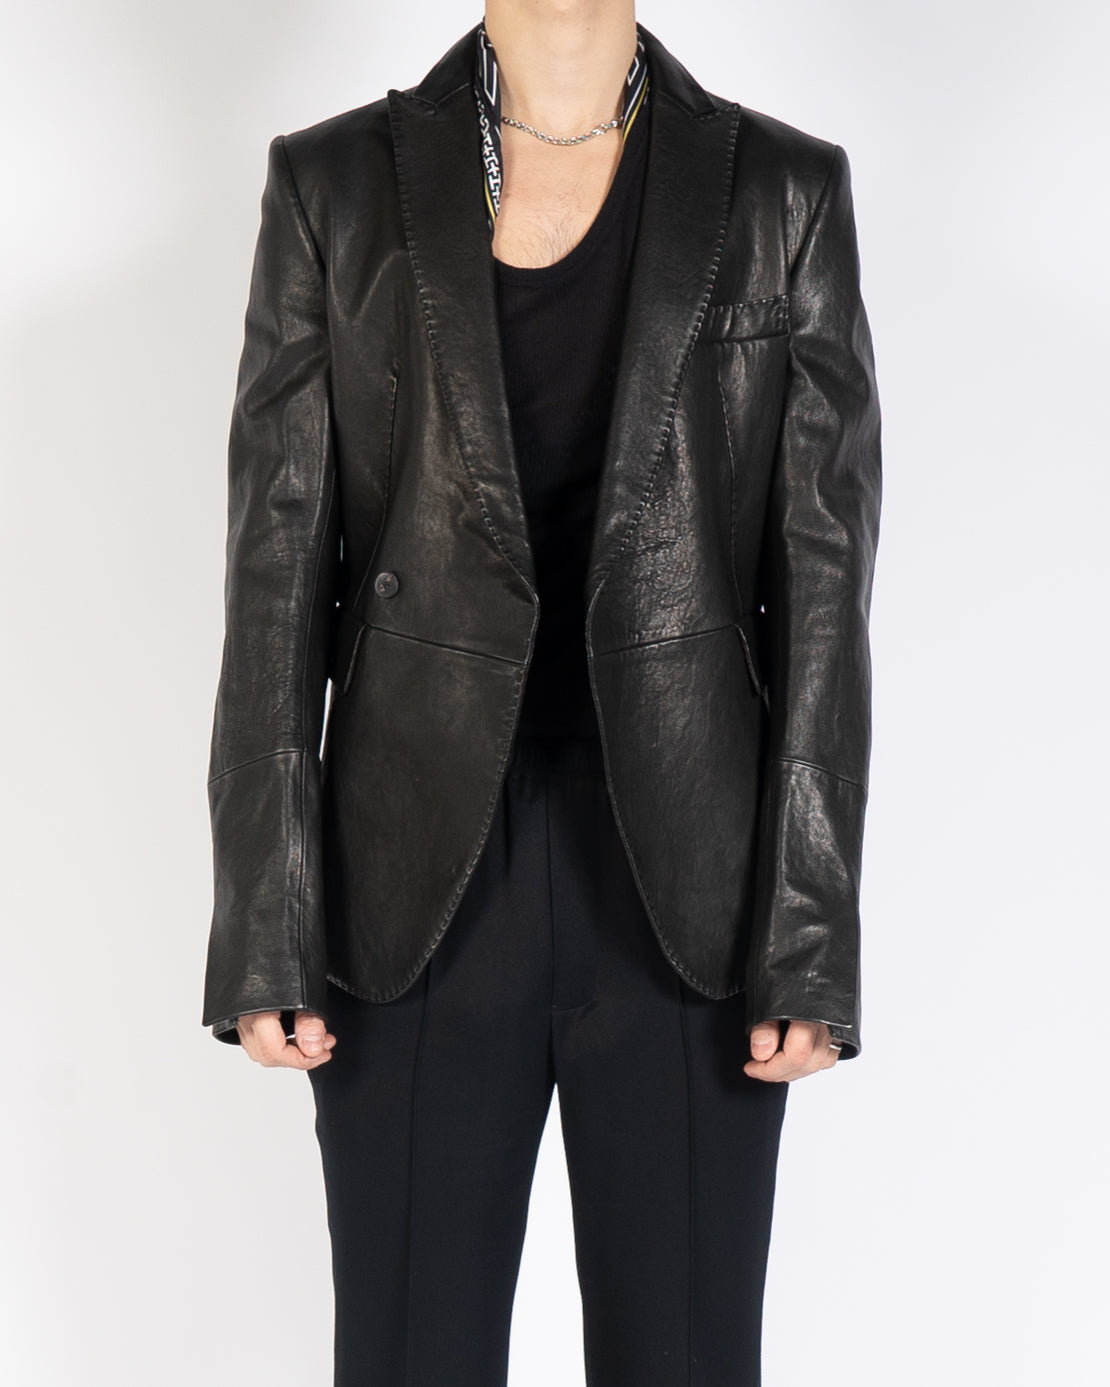 FW15 Double Breasted Leather Blazer